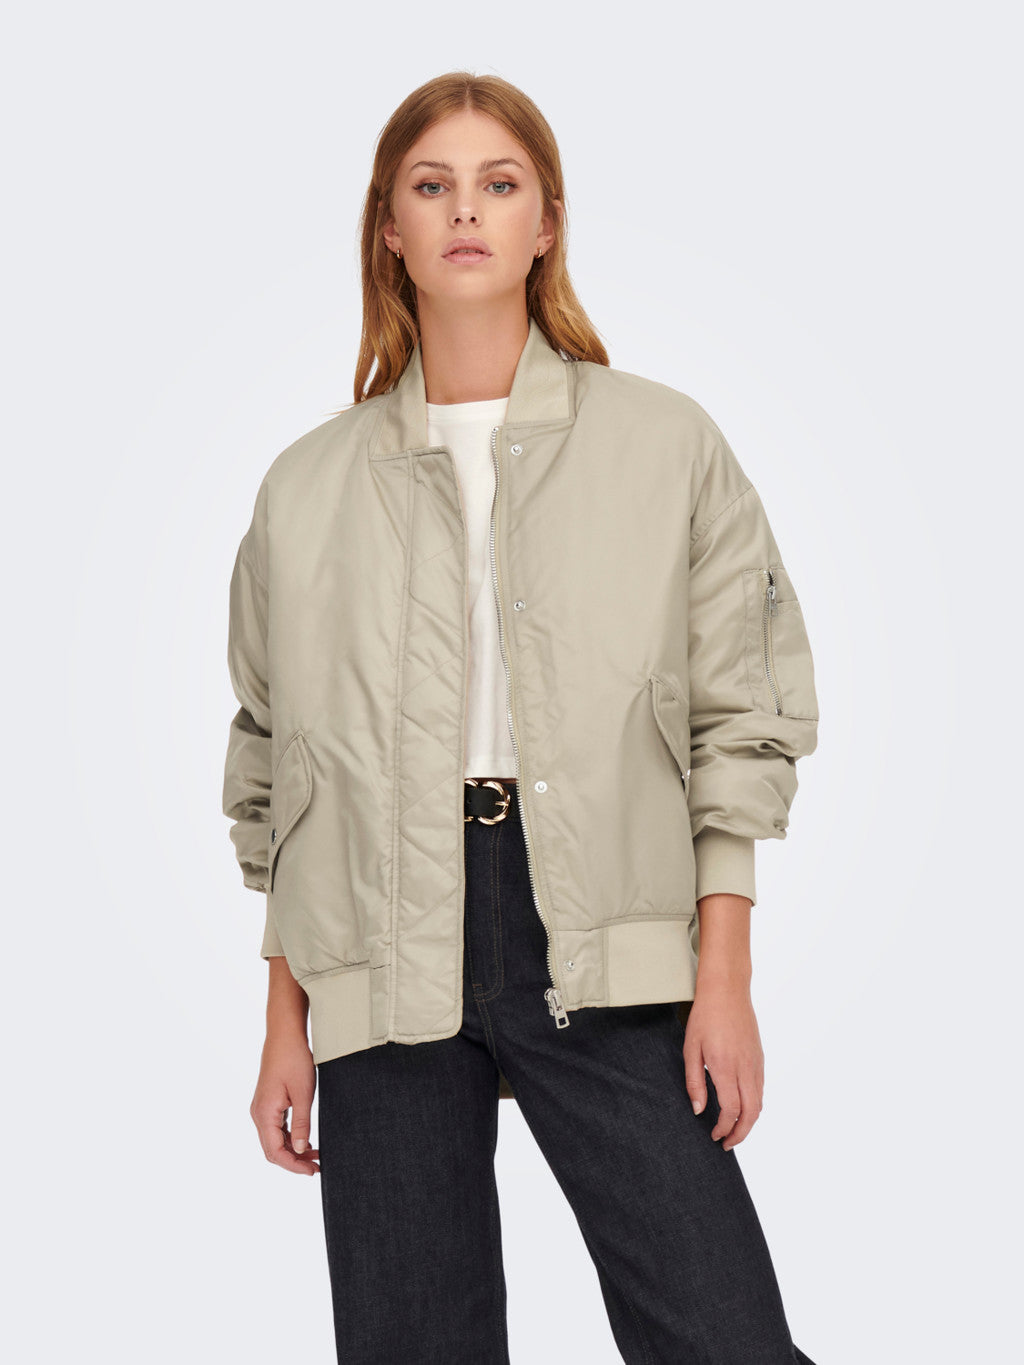 ONLY // MANTEAU ISOLÉ FEMME BOMBER, 15270694